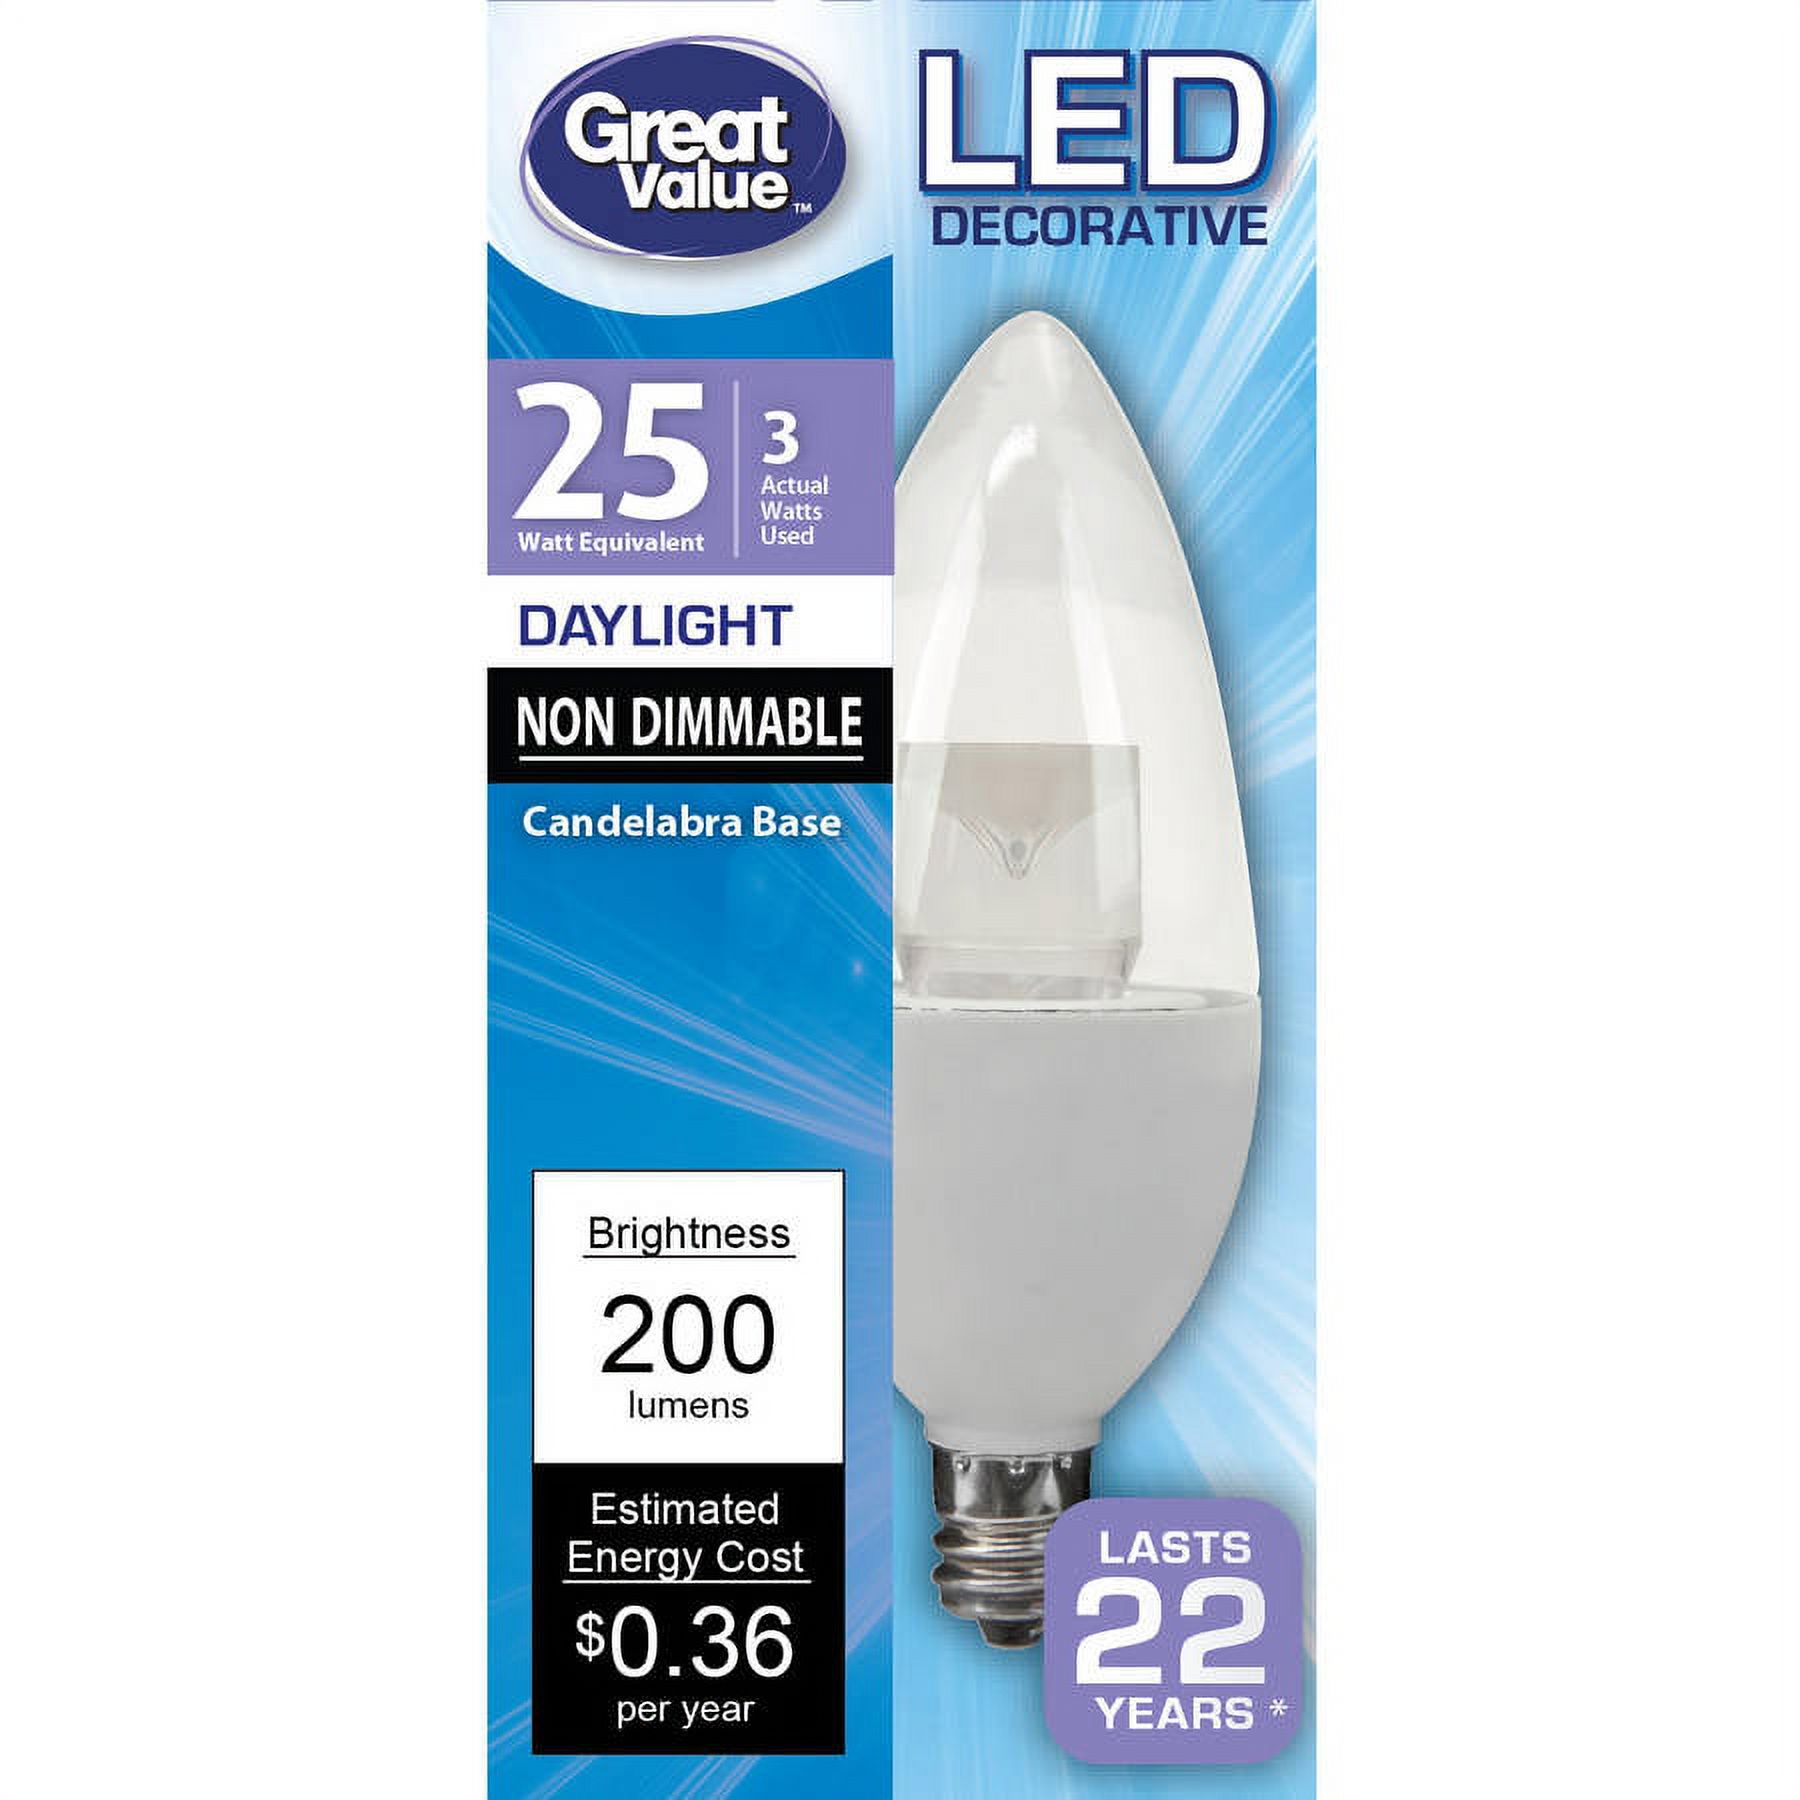 Great Value LED Light Bulb, 3W (25W Equivalent) B11 Decorative Lamp E12 Candelabra Base, Non-Dimmable, Daylight, 1-Pack - image 1 of 5